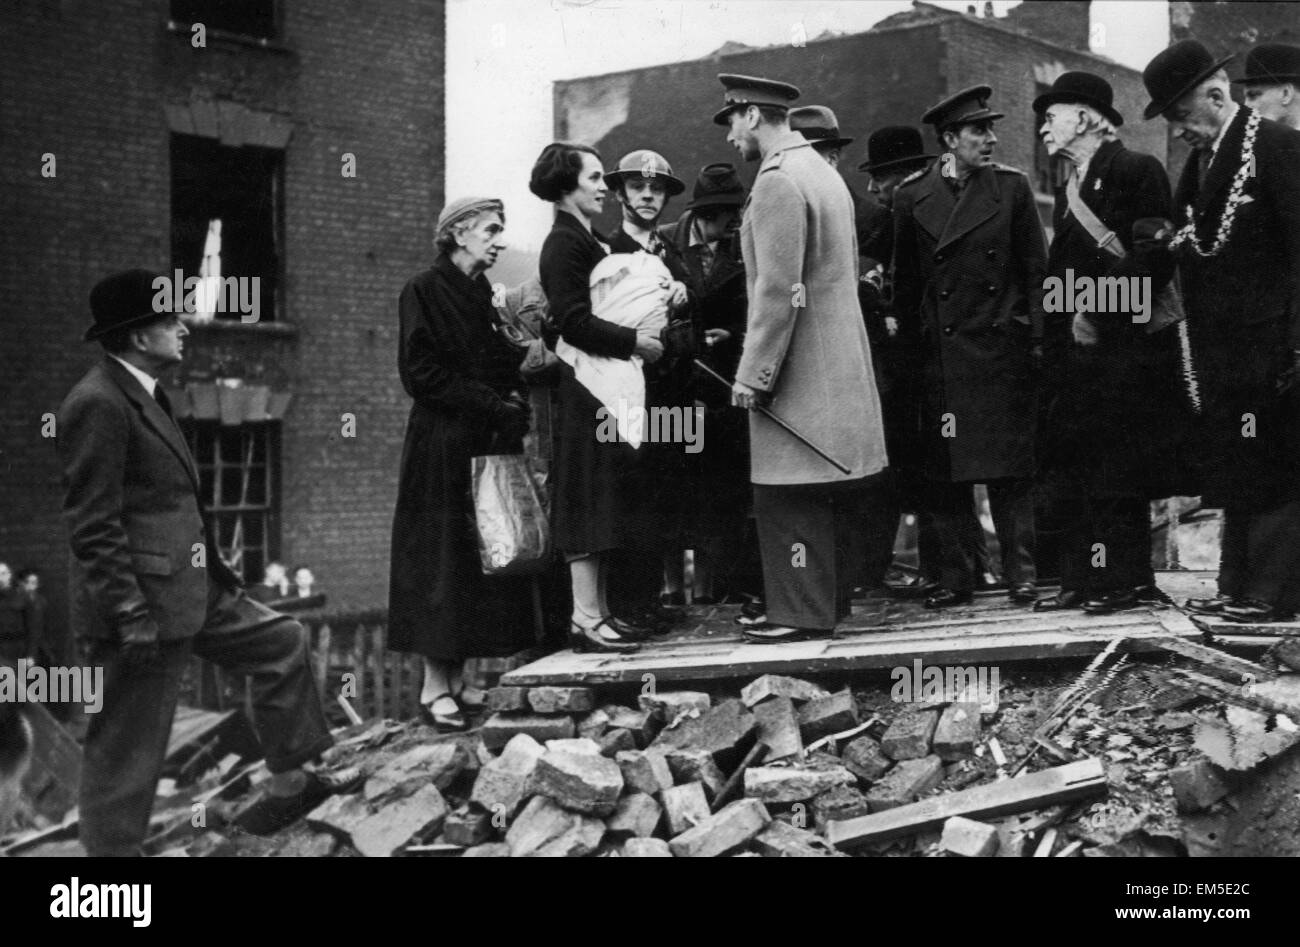 King George VI meets residents of a bombed street during his visit to the city of Bristol following an air raid. December 1940. Stock Photo